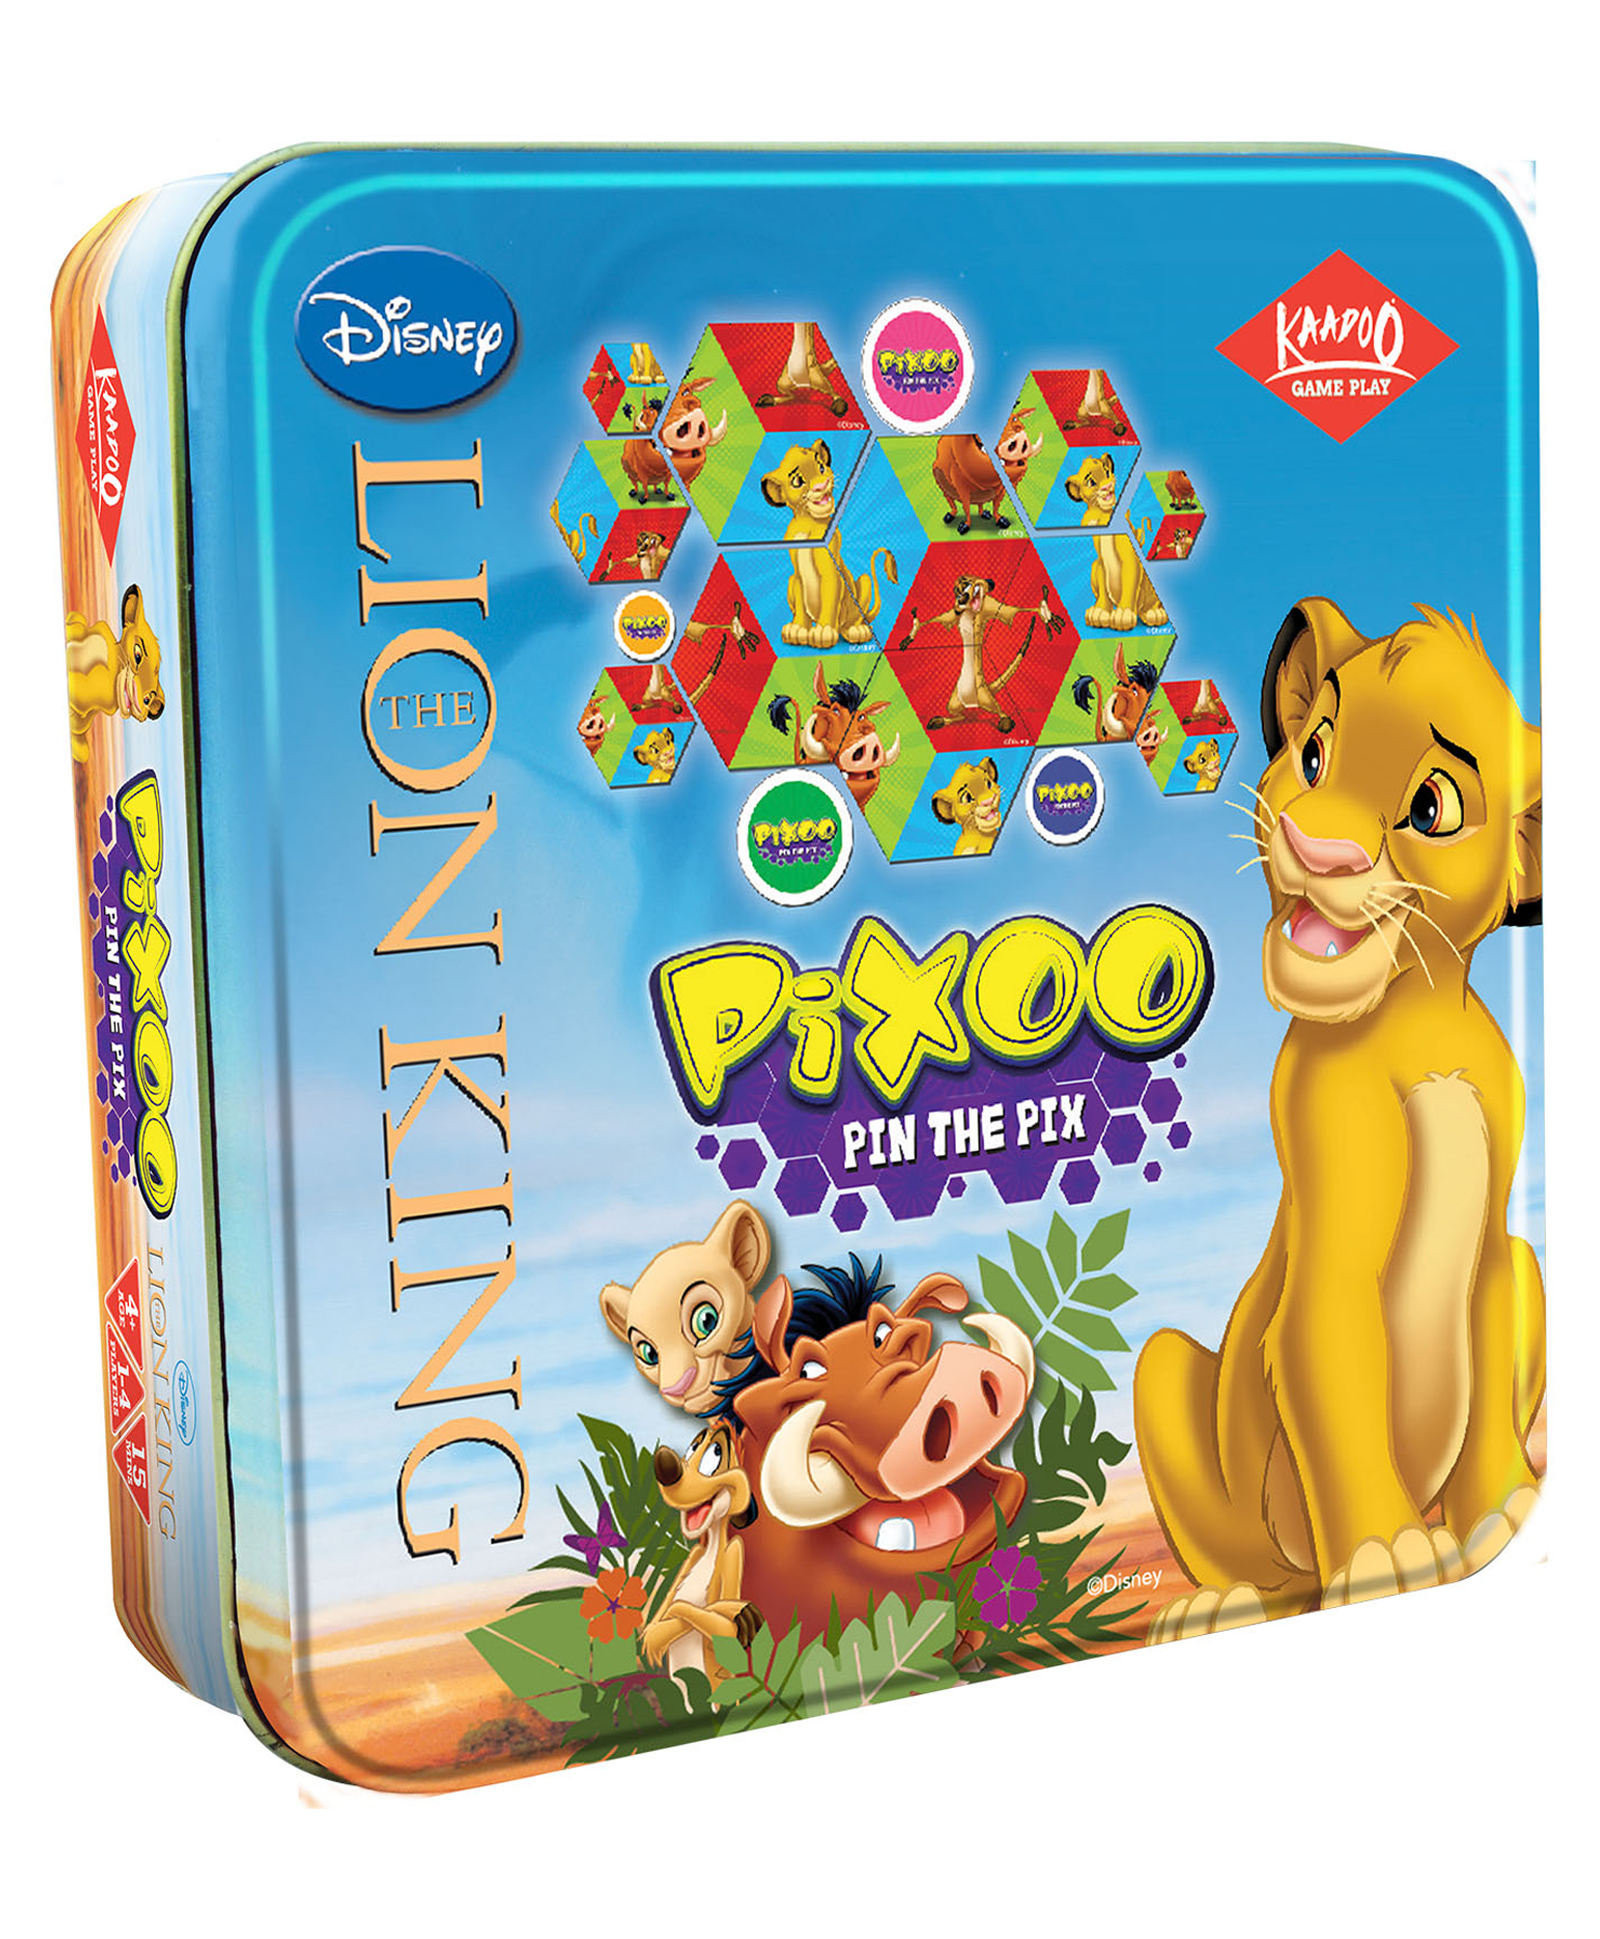 KAADOO Disney Pixoo - The Lion King Puzzle Game for 4+ Years and Above -  Kids & Family - Made in India - Disney Gift - Multicolor (Color May Vary)  Online India,